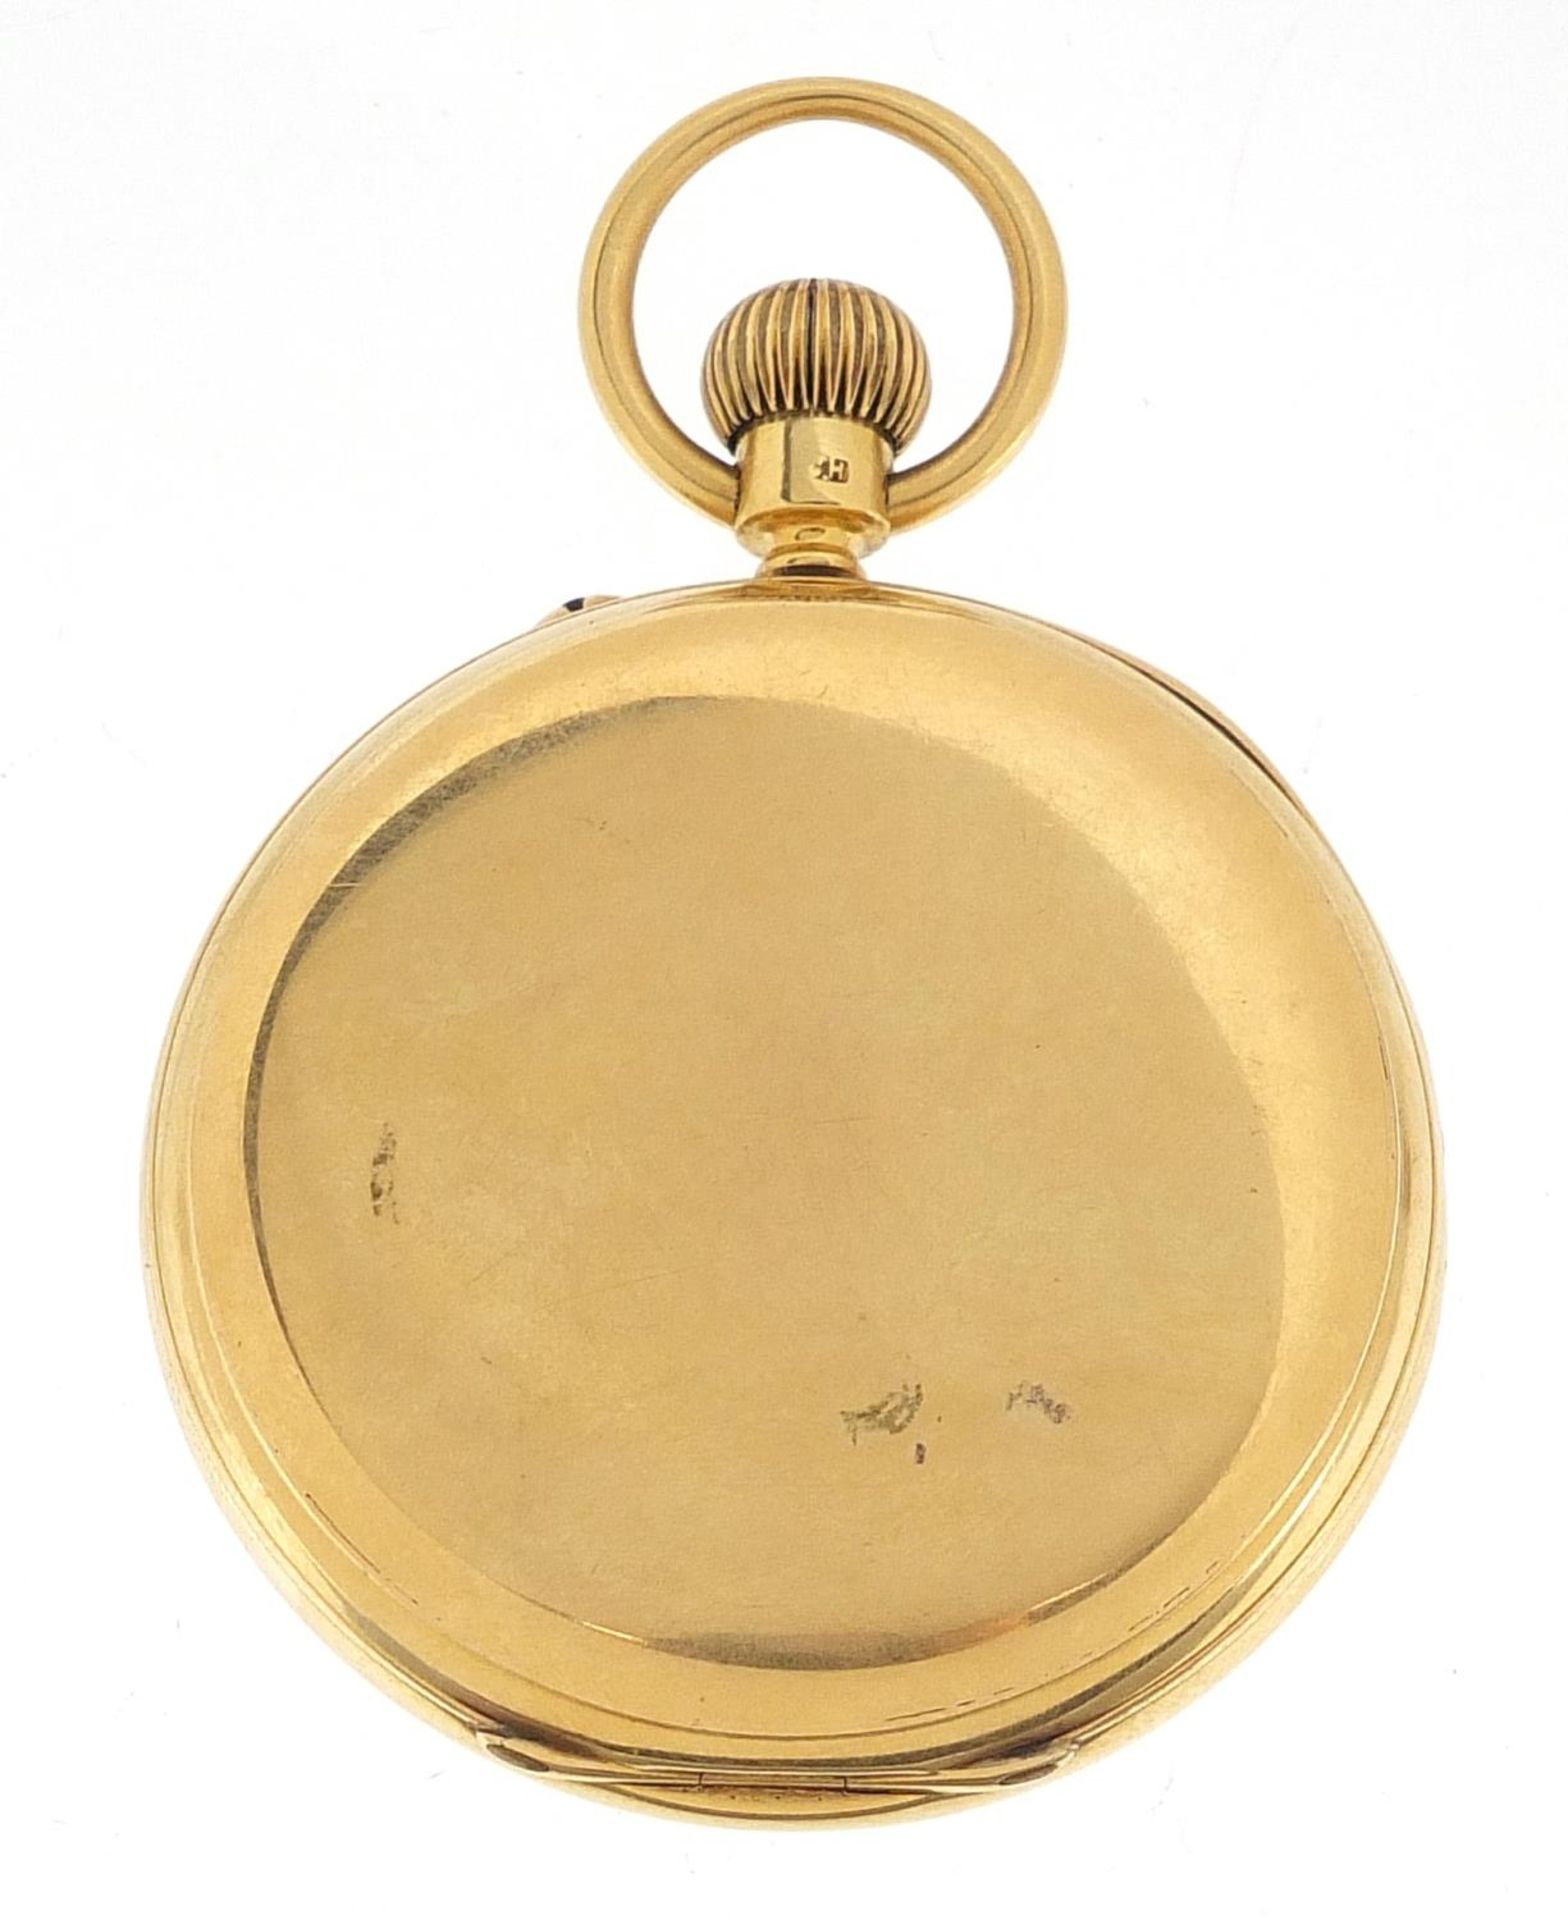 Barraud & Lunds, gentlemen's 18ct gold open face pocket watch, the movement numbered 3/5022, the - Image 5 of 6